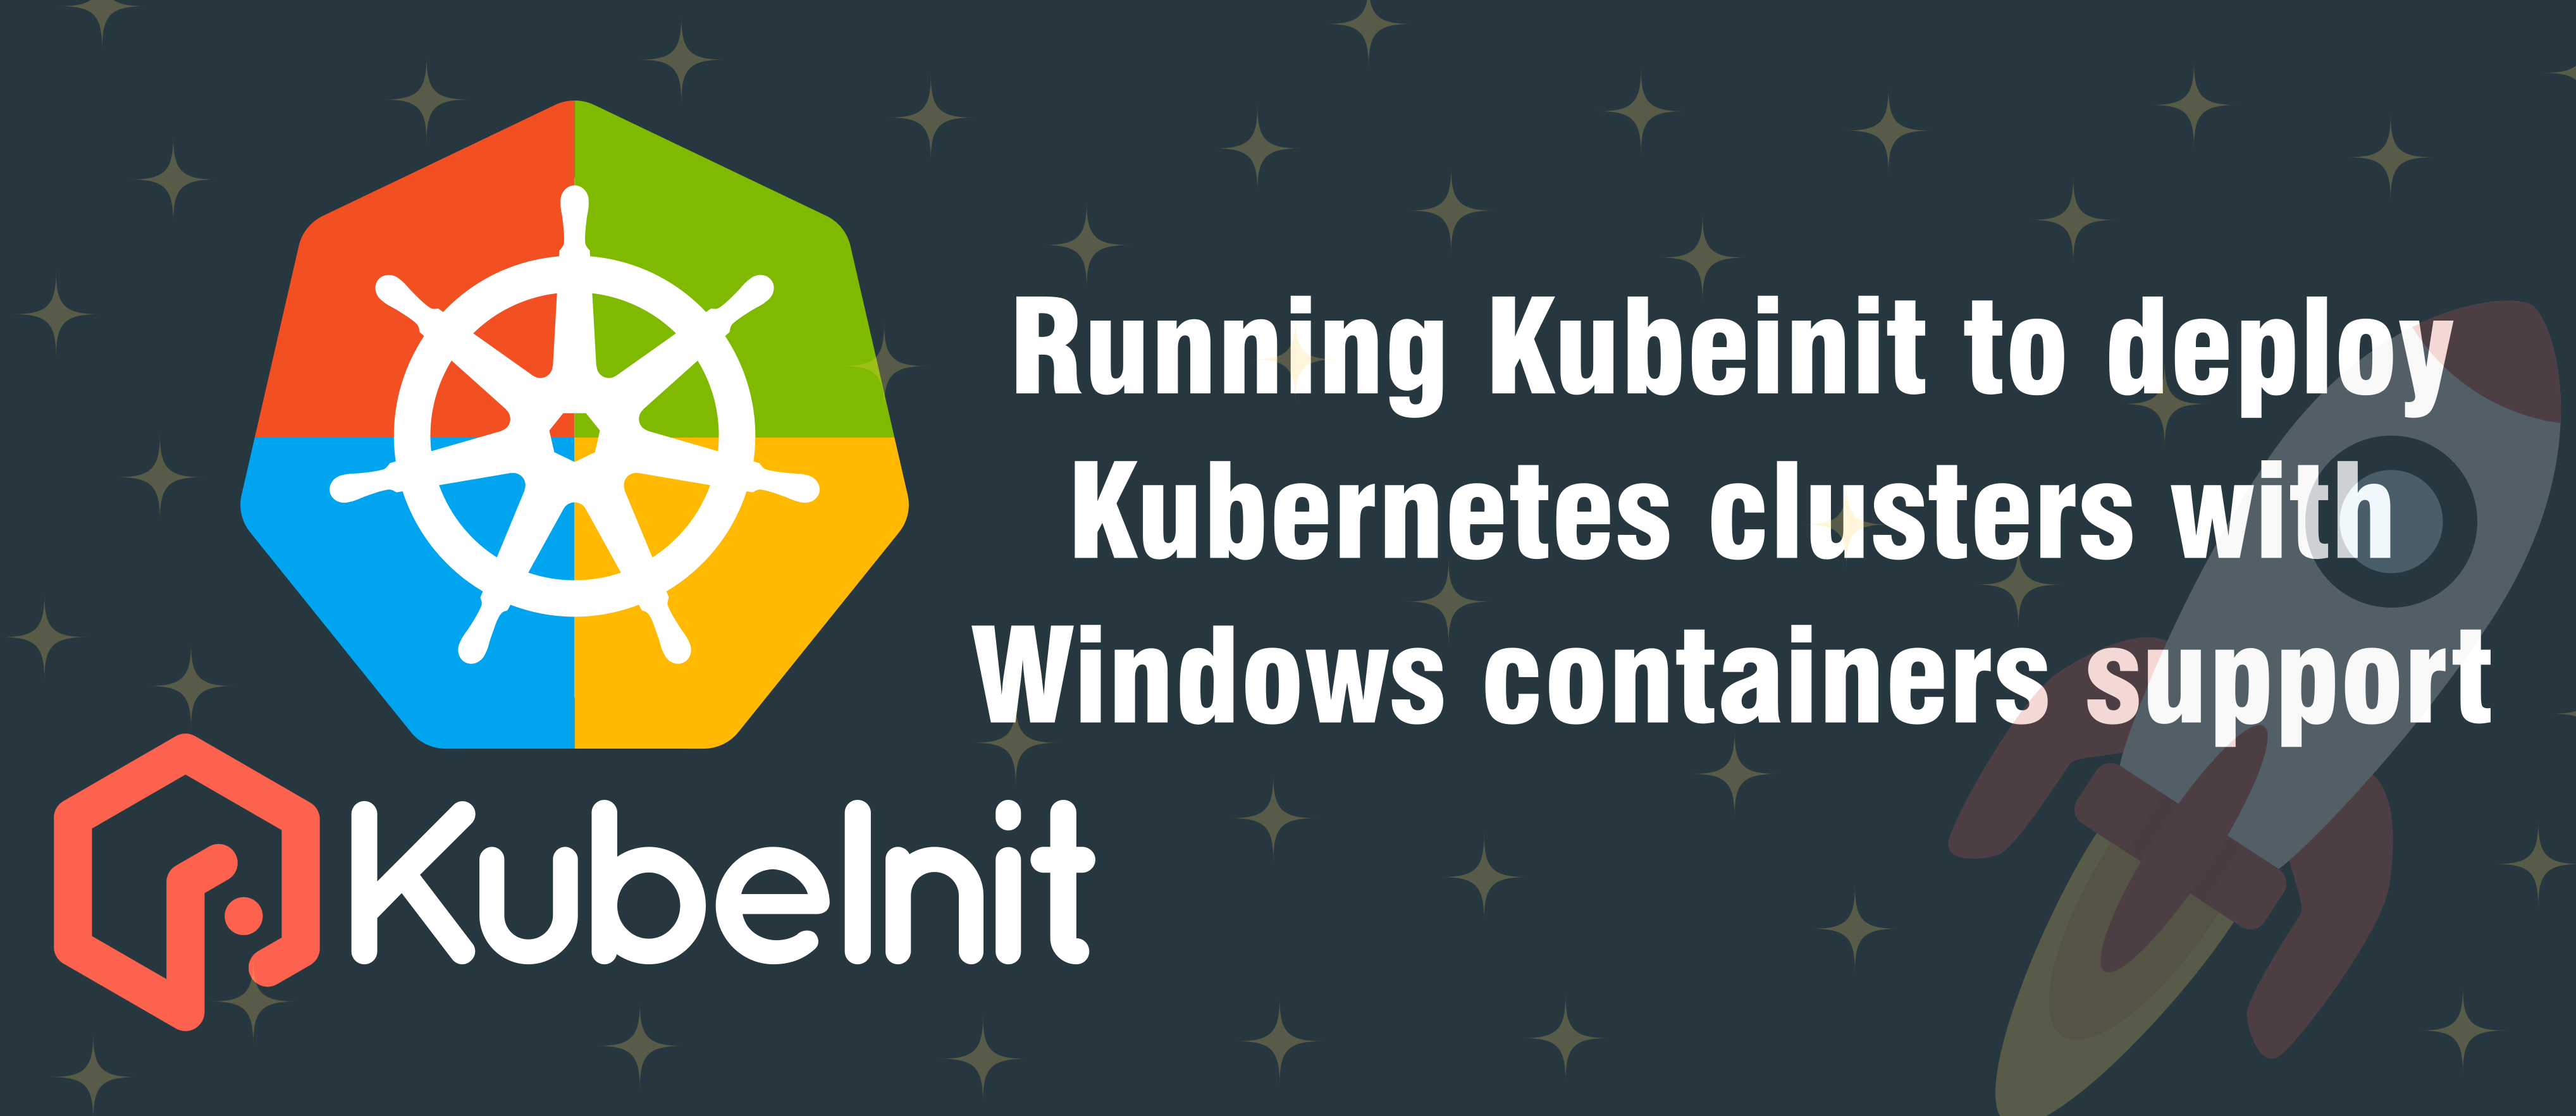 Deploying a Kubernetes cluster with Windows containers support